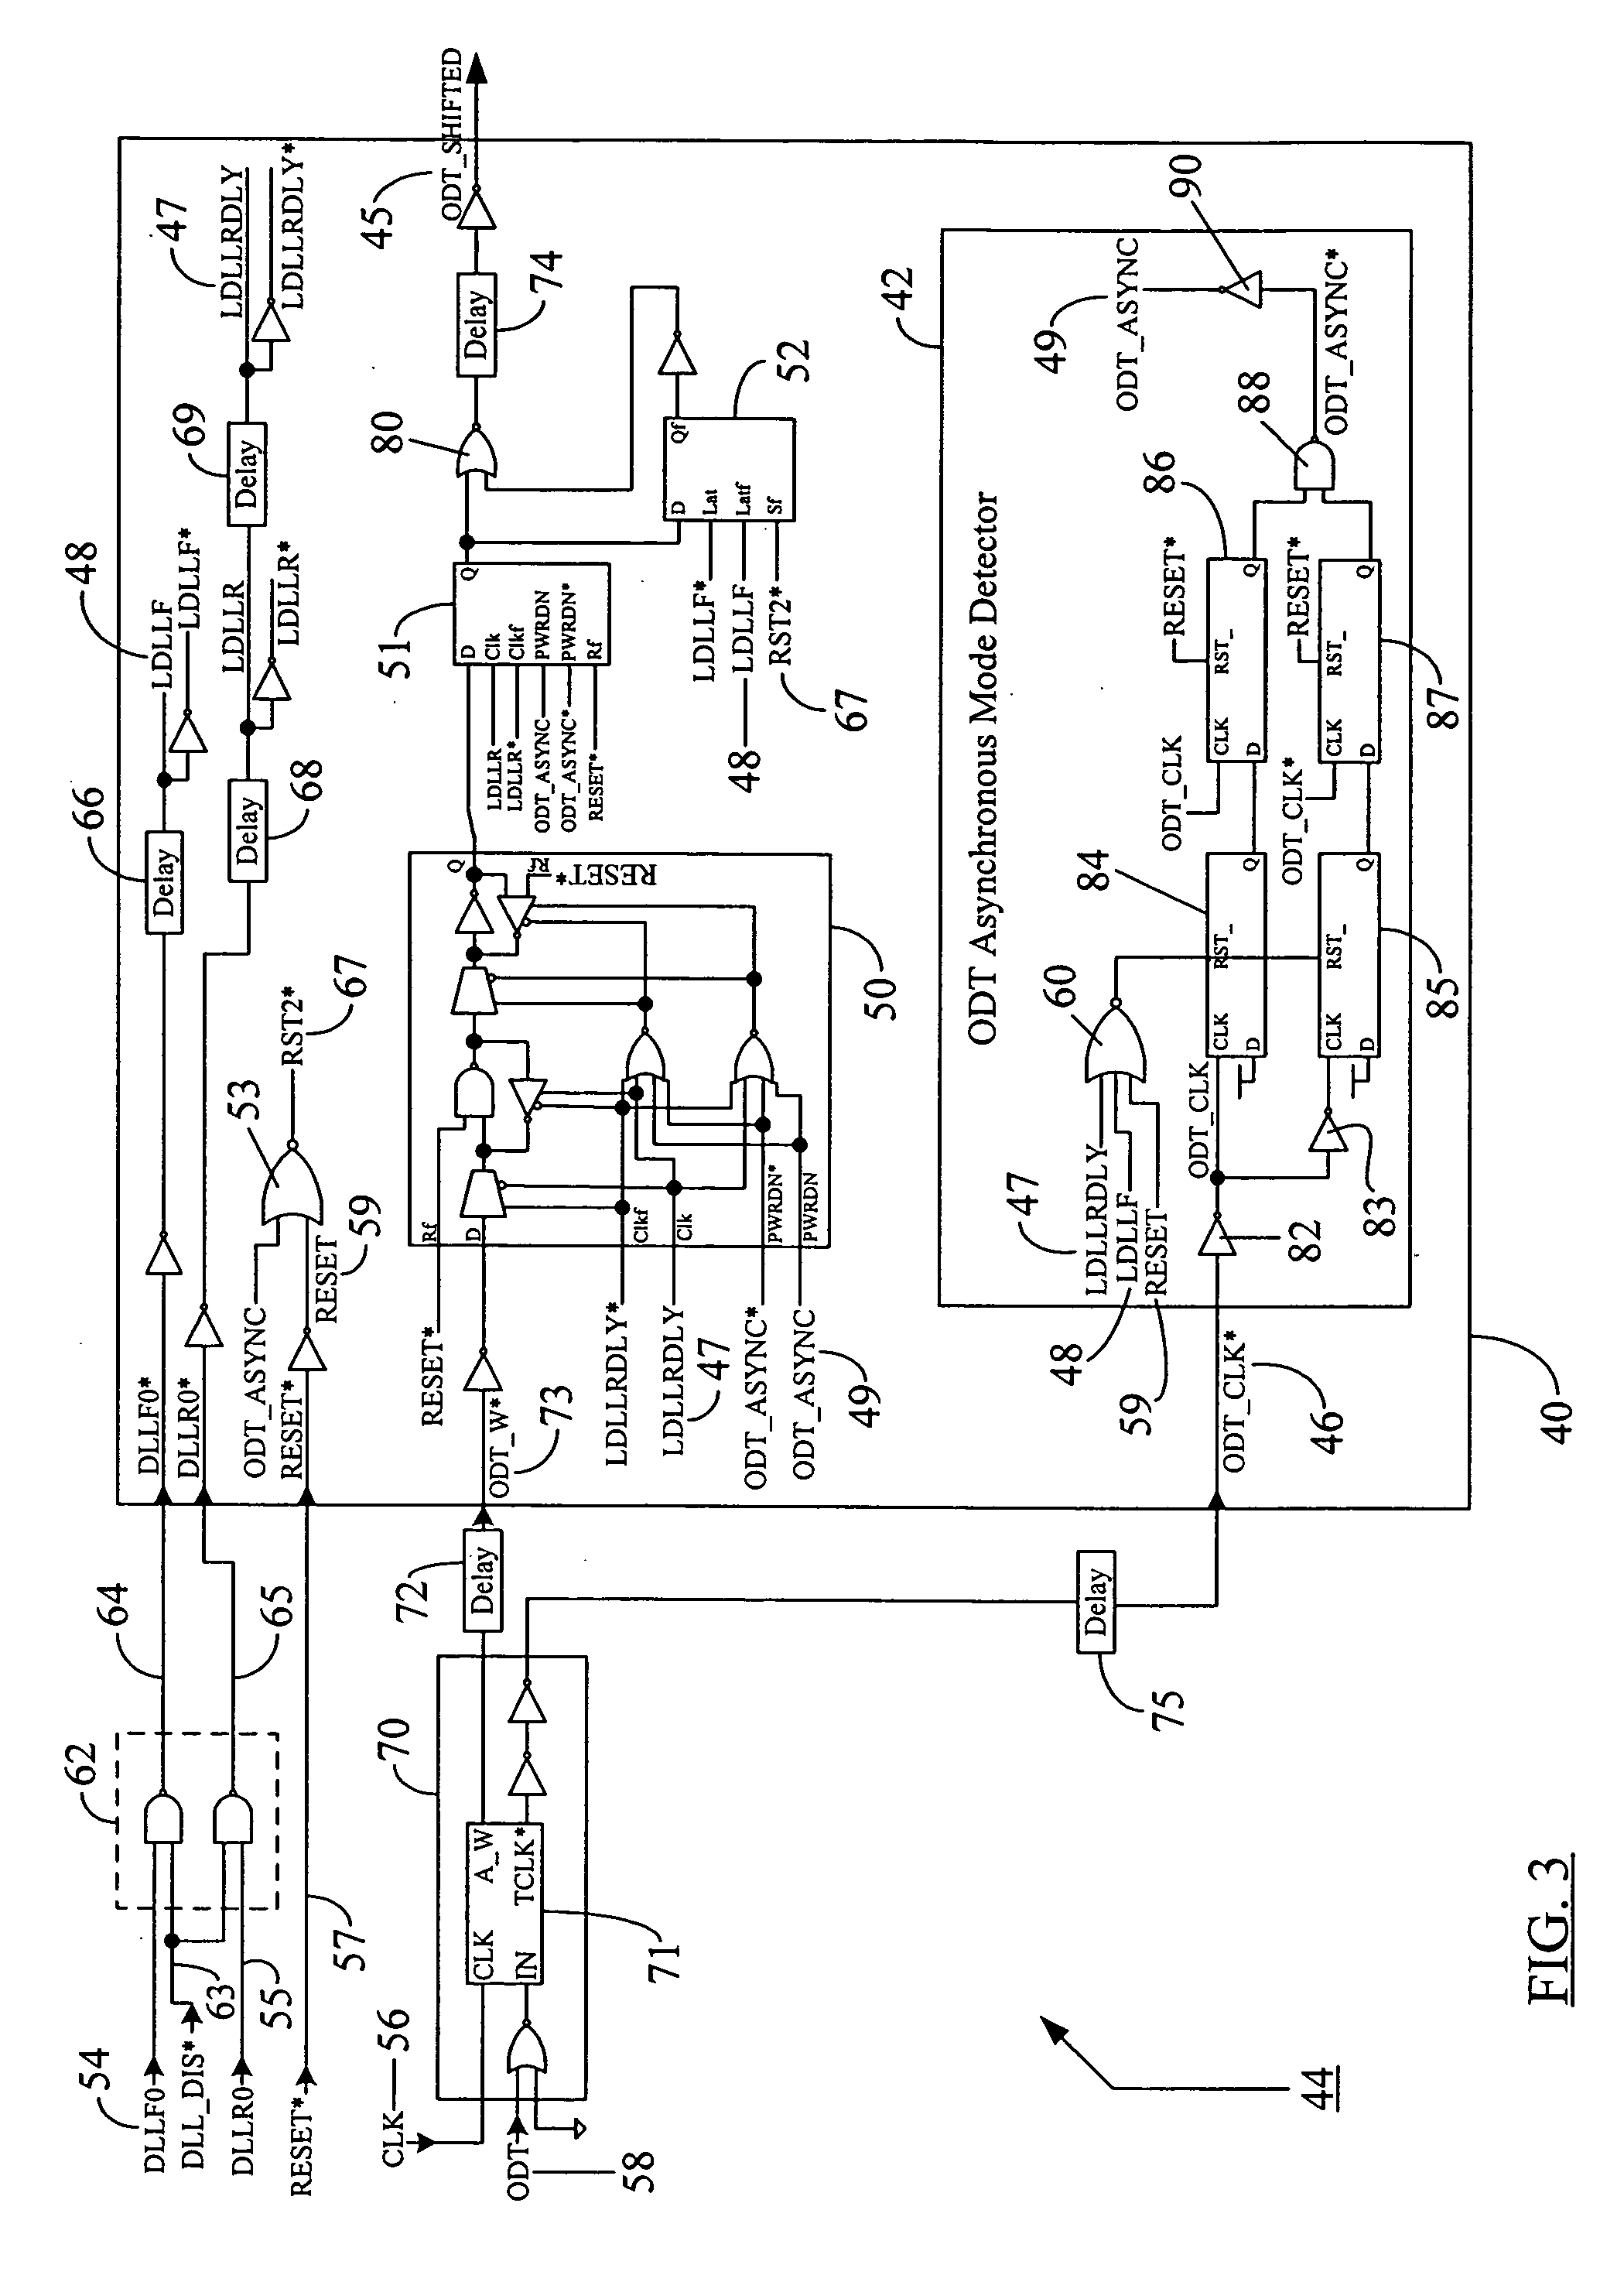 Method and apparatus for selecting an operating mode based on a determination of the availability of internal clock signals